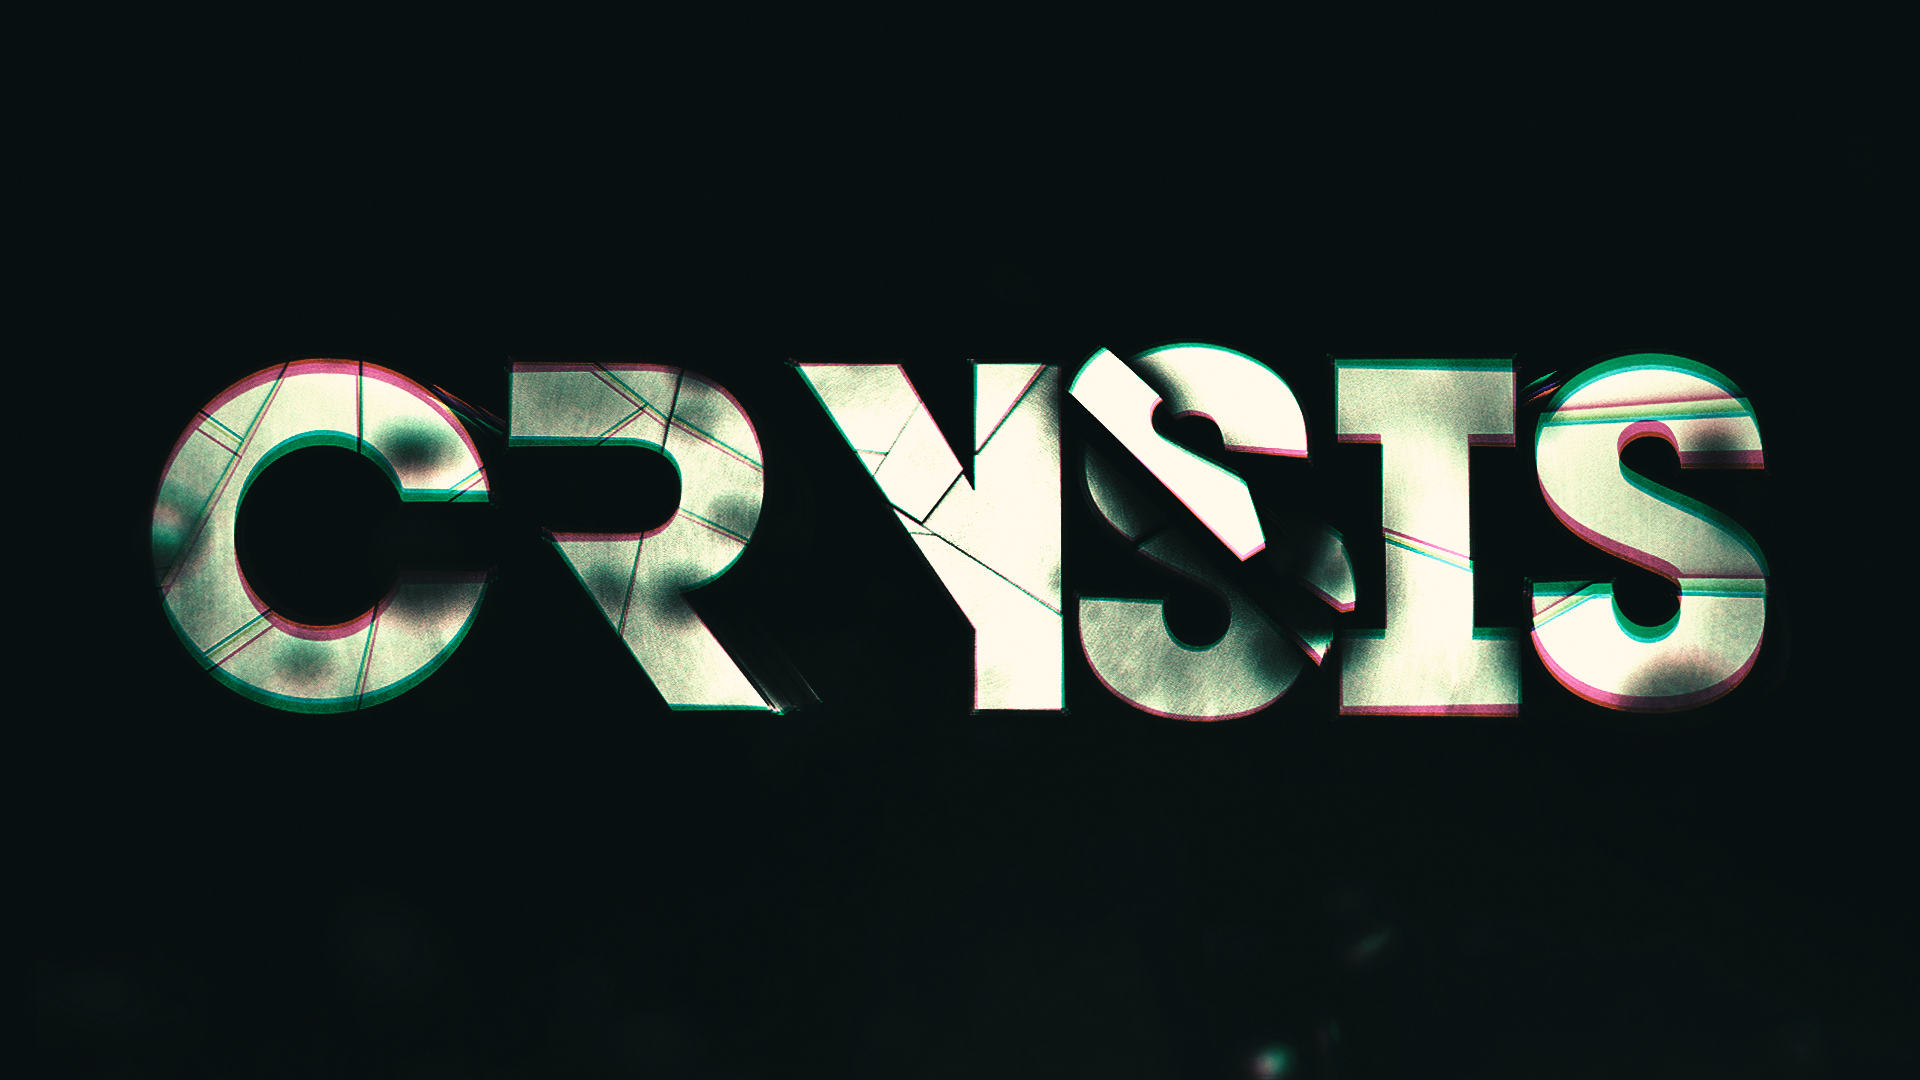 General 1920x1080 Crysis photoshopped typography